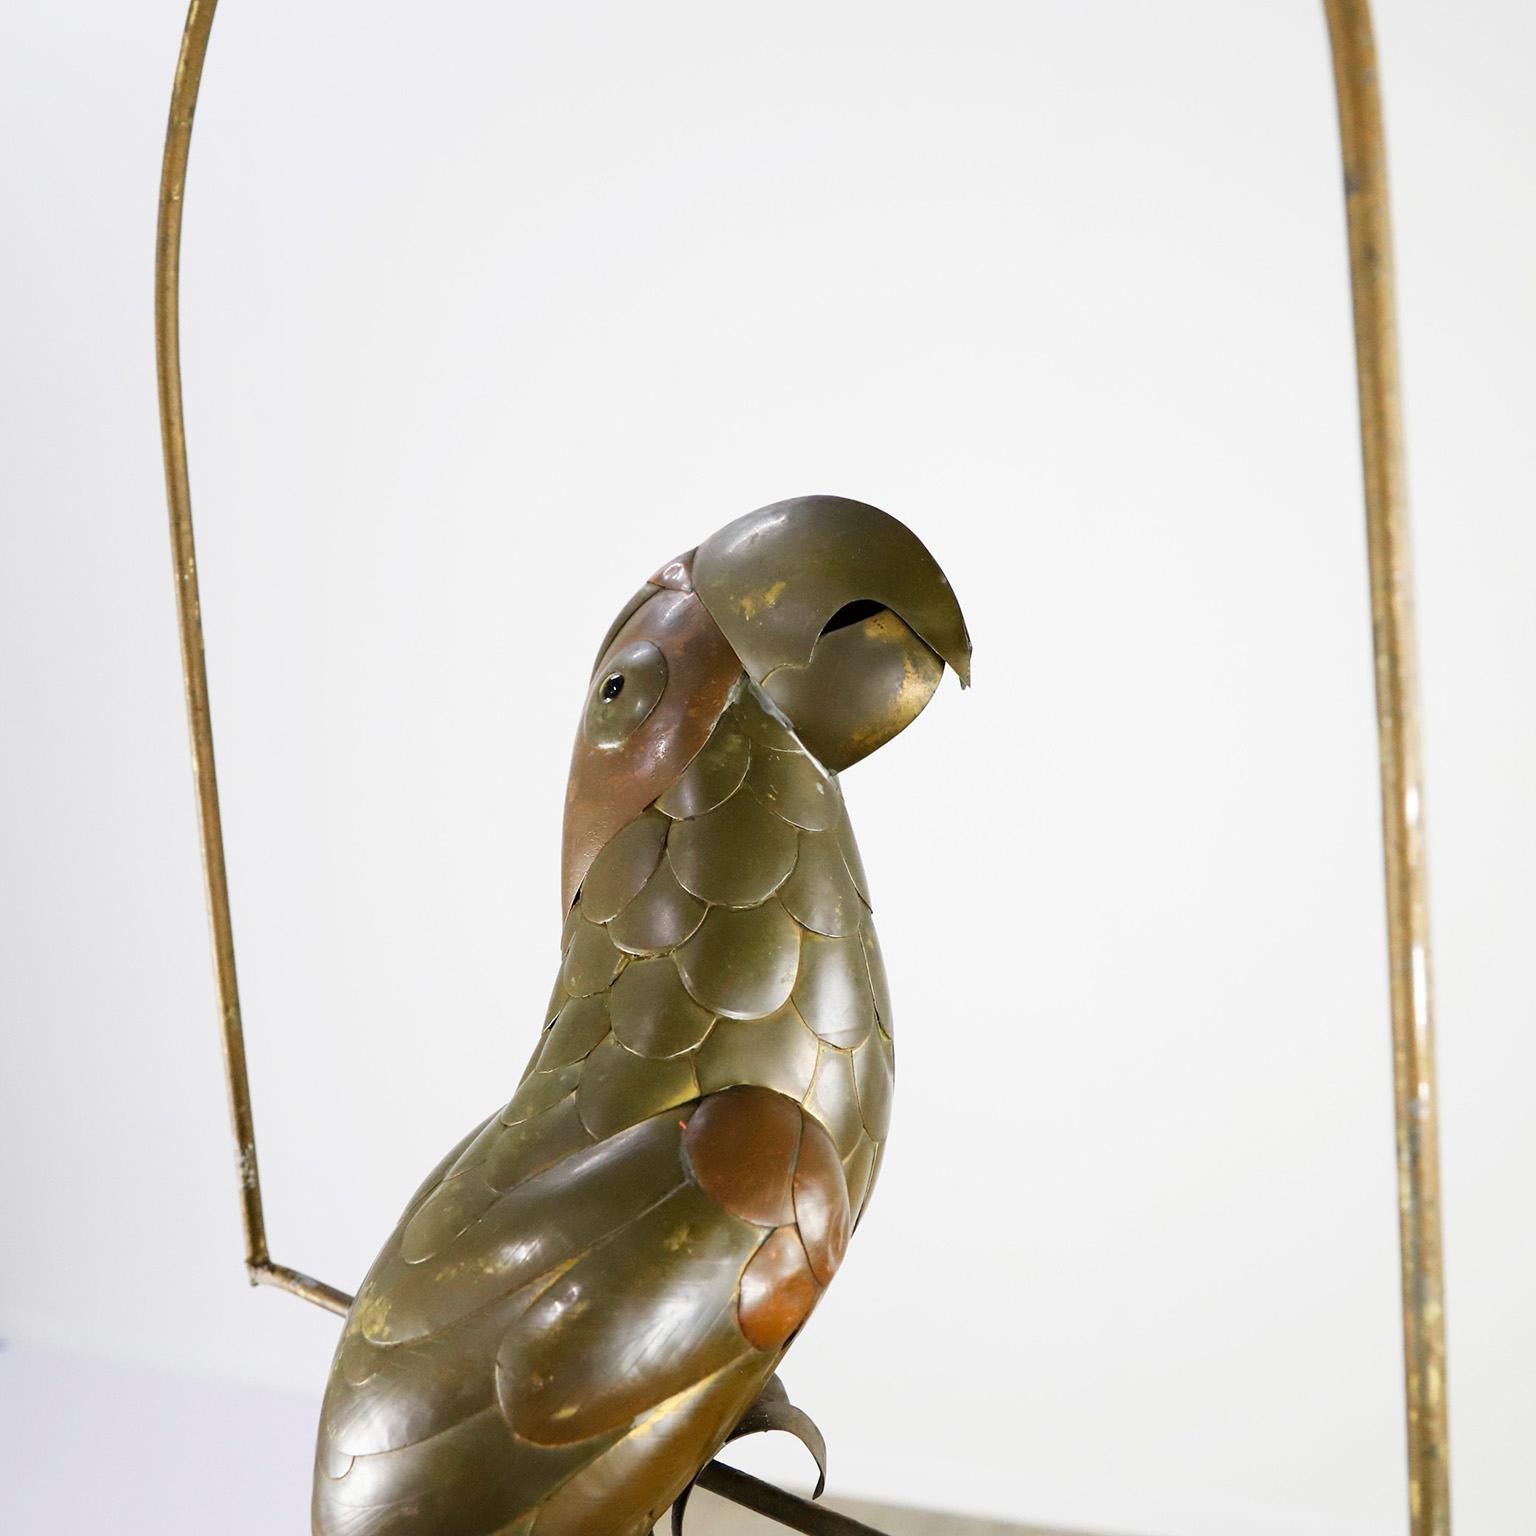 Copper, brass and aluminium Parrot on a hoop hanging stand by Sergio Bustamante, circa 1960. presents some damage to the head and tail.

Sergio Bustamante is a Mexican Artist and sculptor. He began with paintings and papier mache figures,